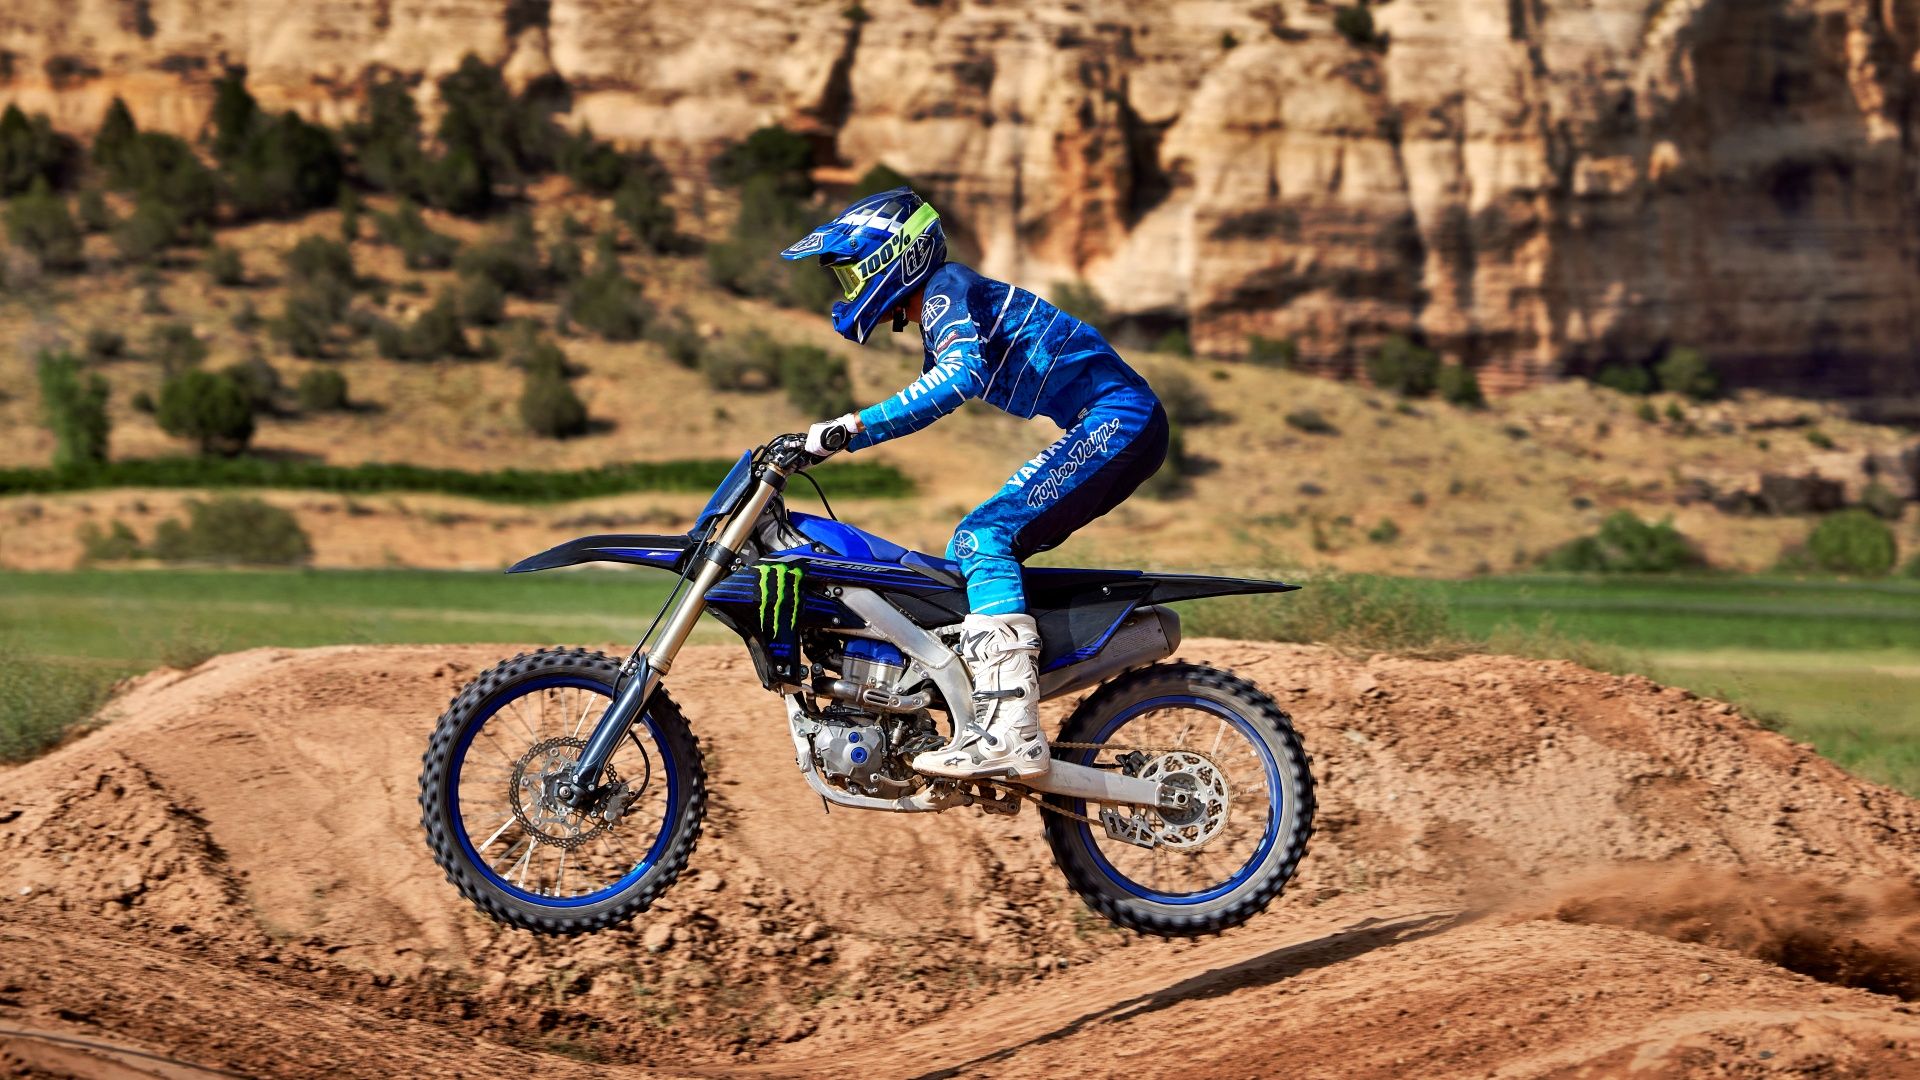 An action shot of a 2023 YAMAHA YZ450F on the dirt track